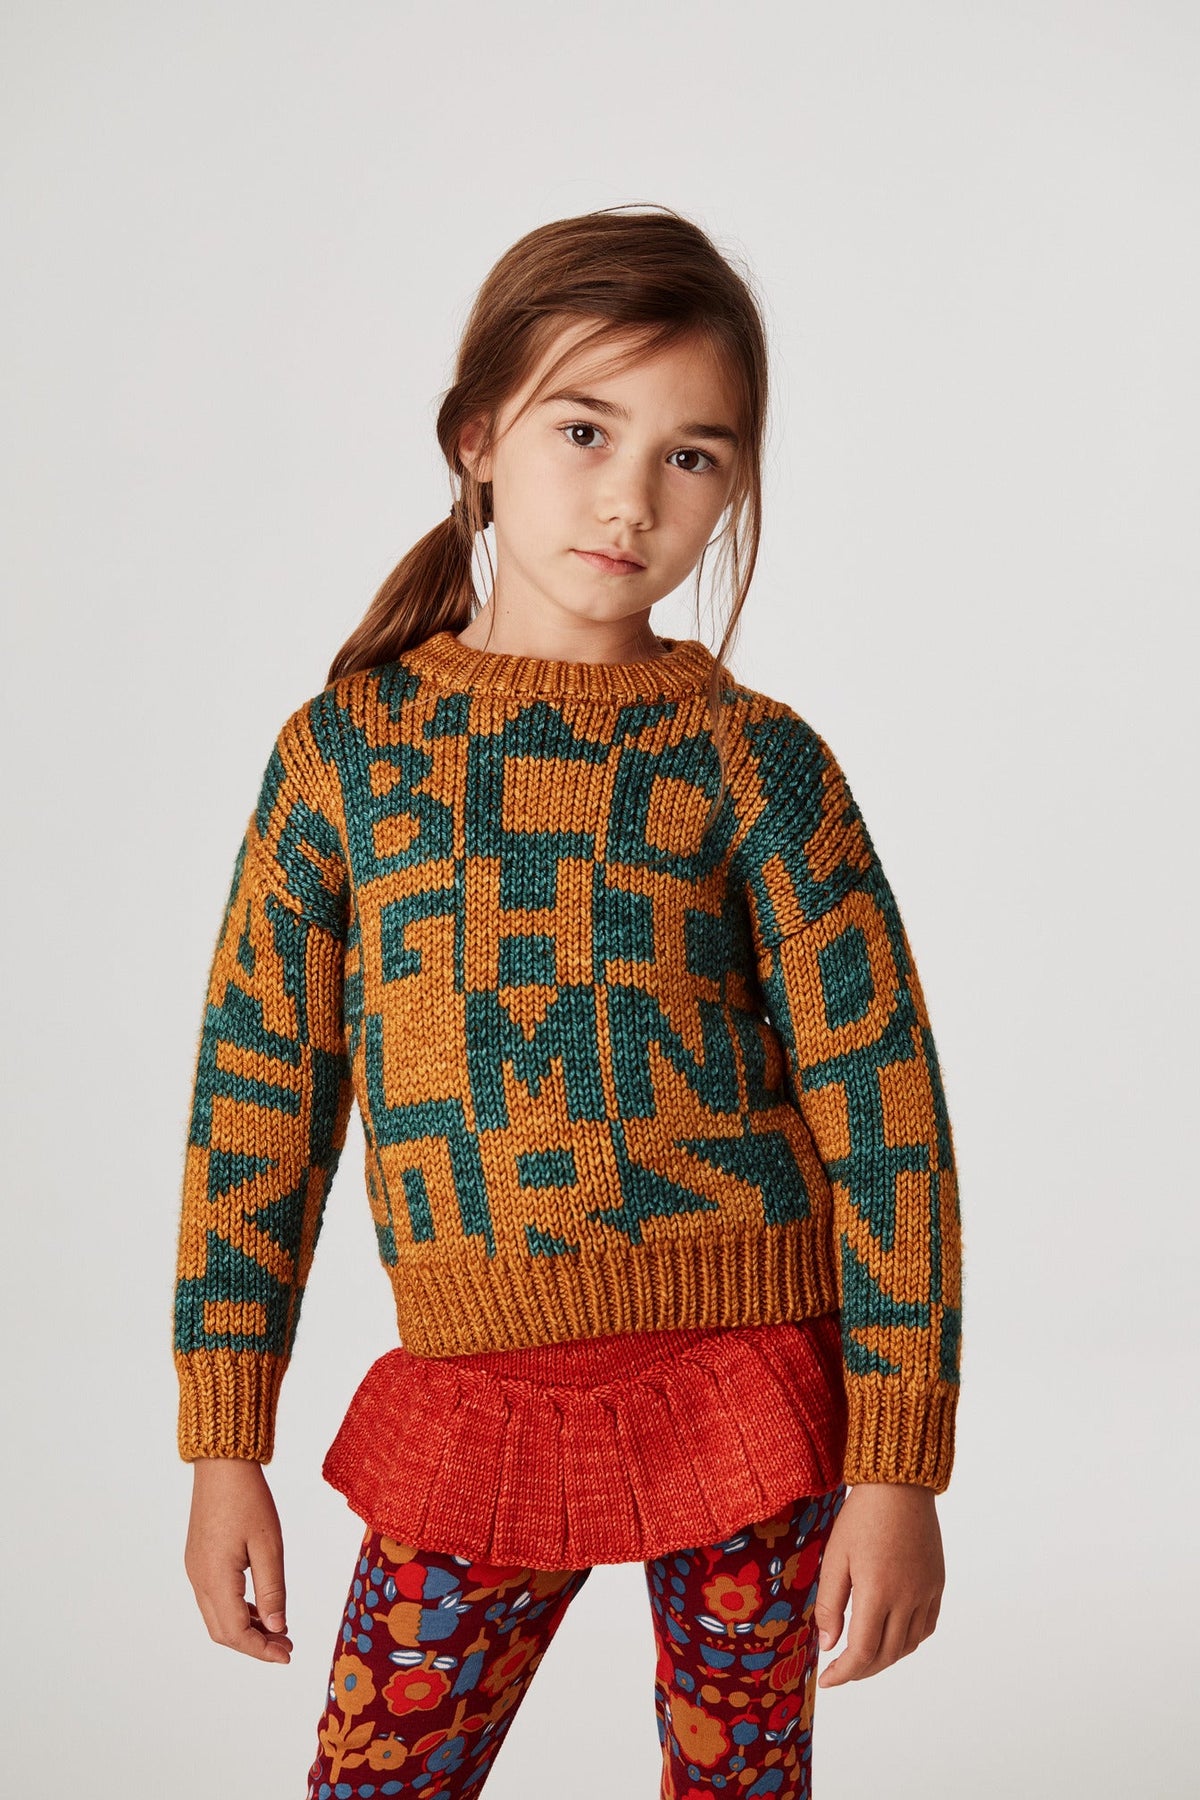 Alphabet Intarsia Sweater - Marigold+Model is 48 inches tall, 44lbs, wearing a size 4-5y